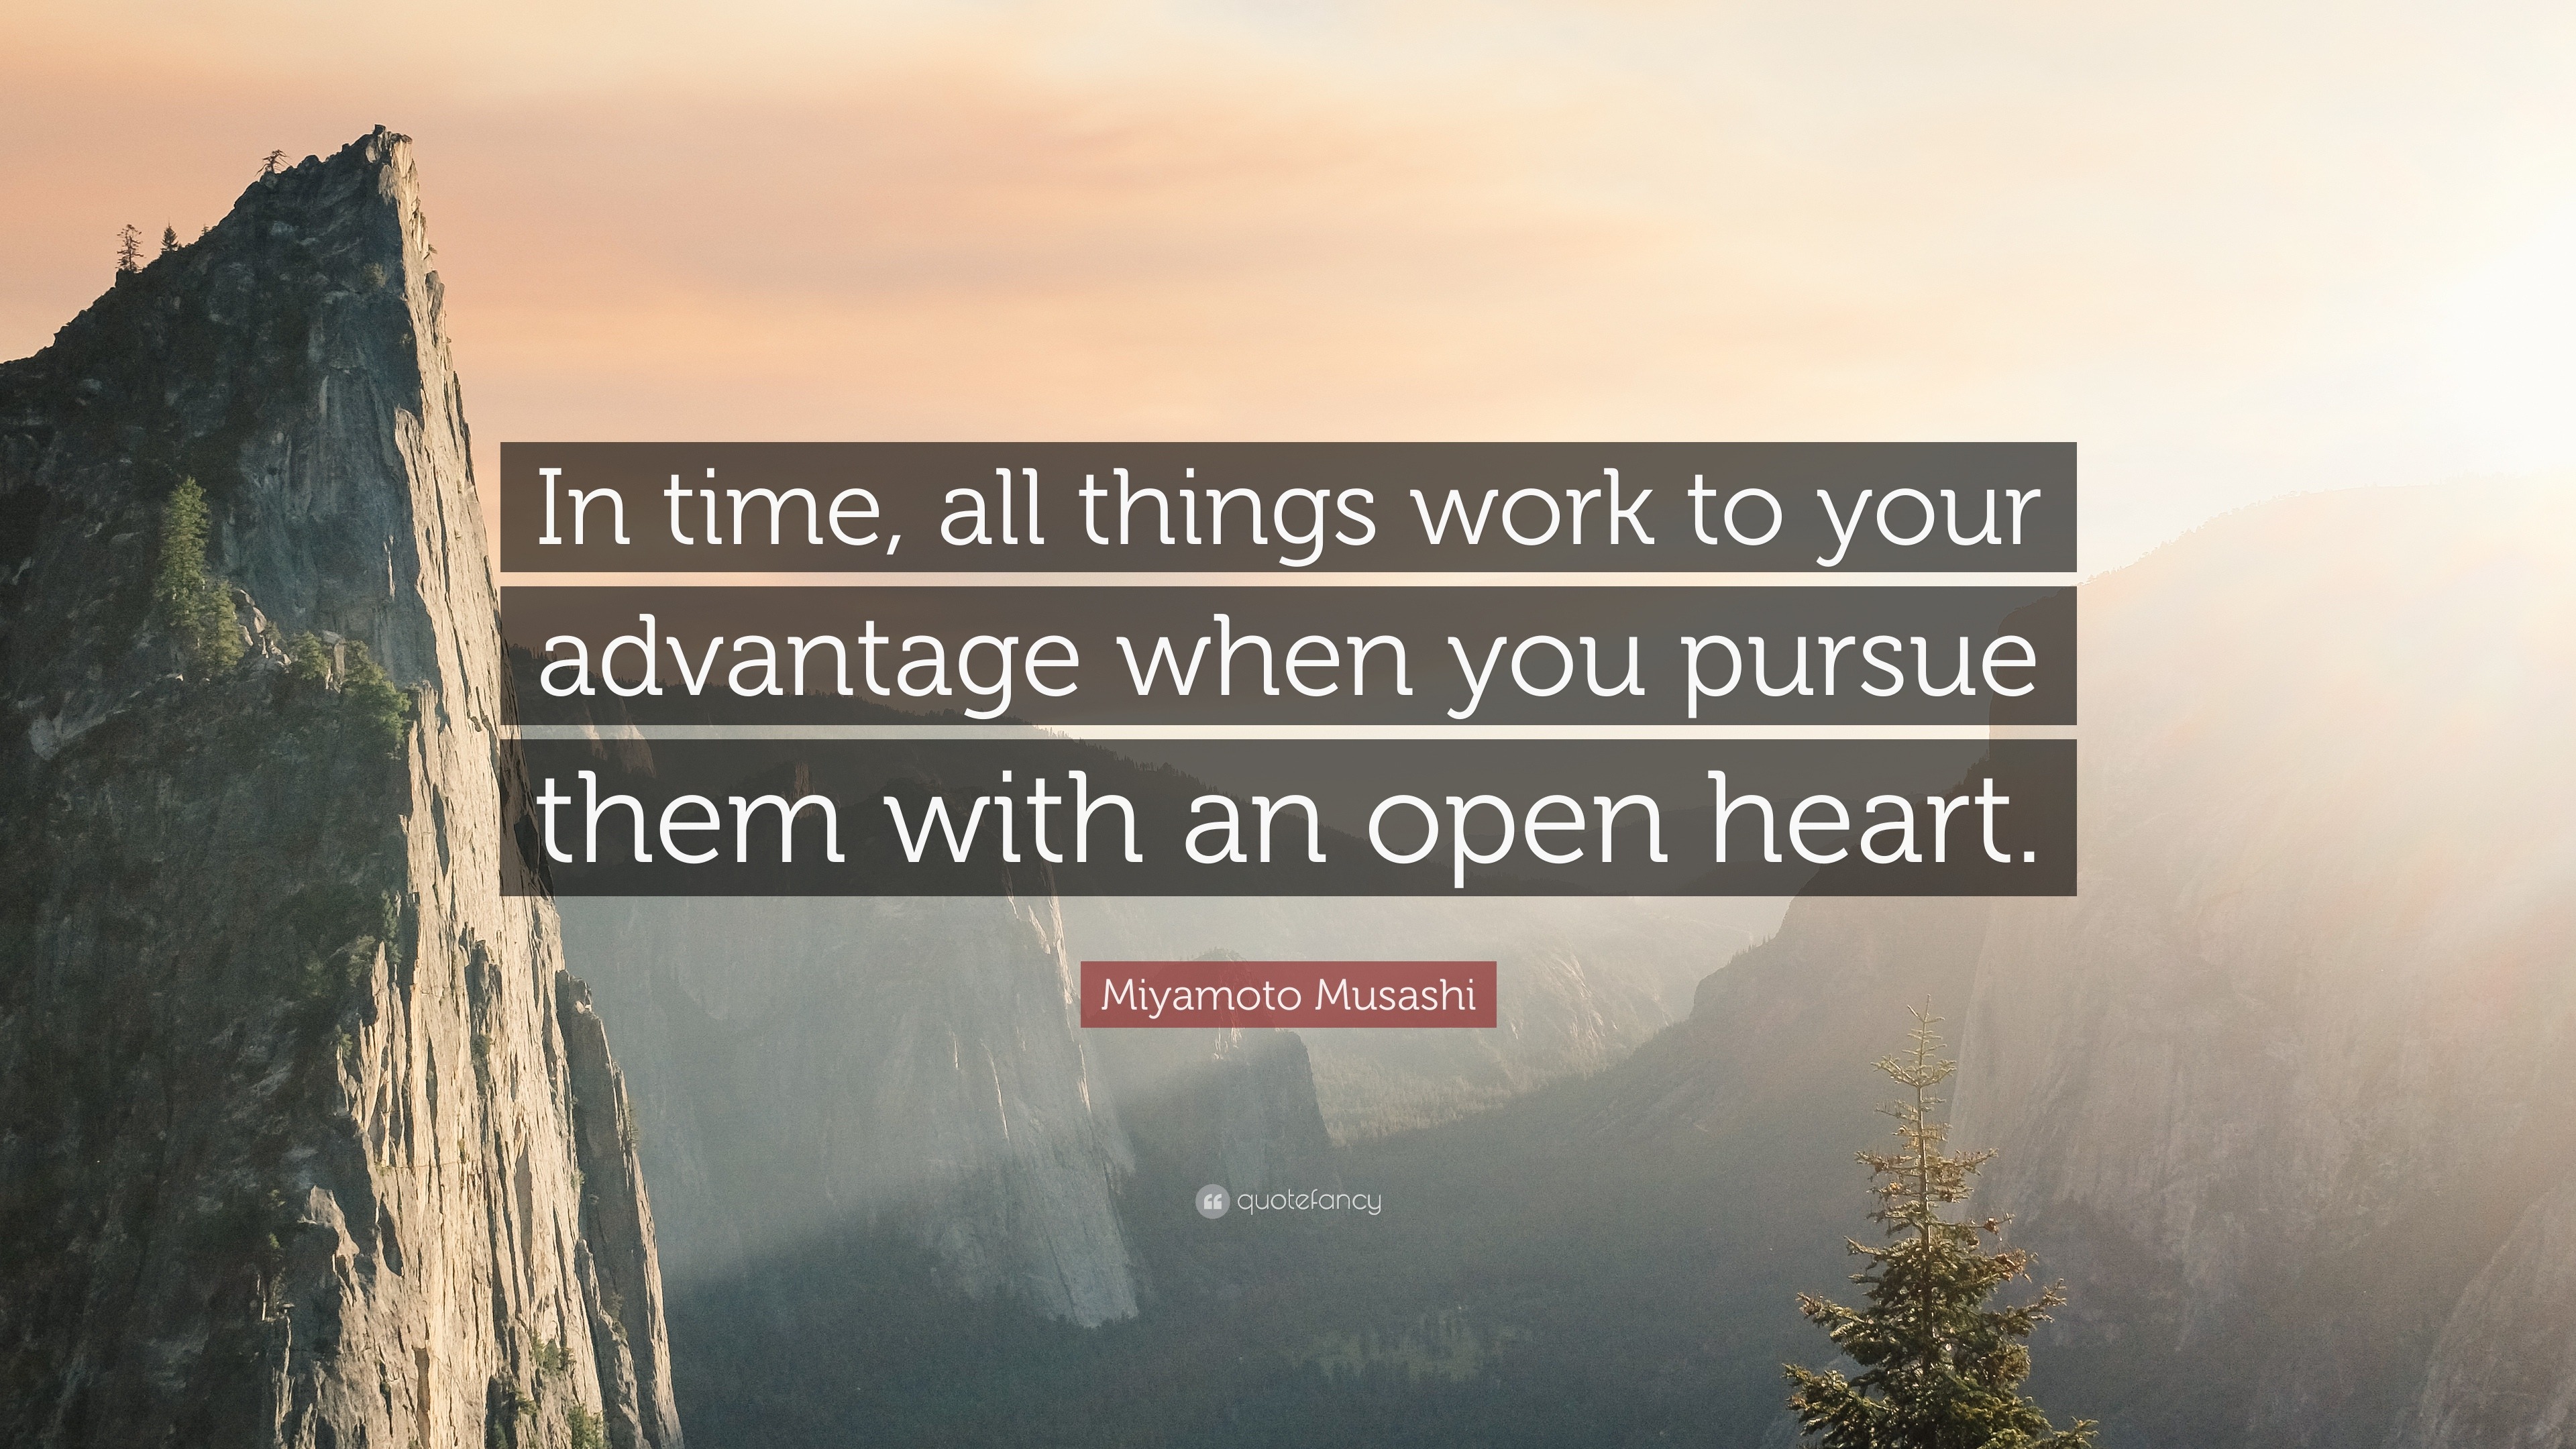 Miyamoto Musashi Quote: “In time, all work to your advantage when you pursue them